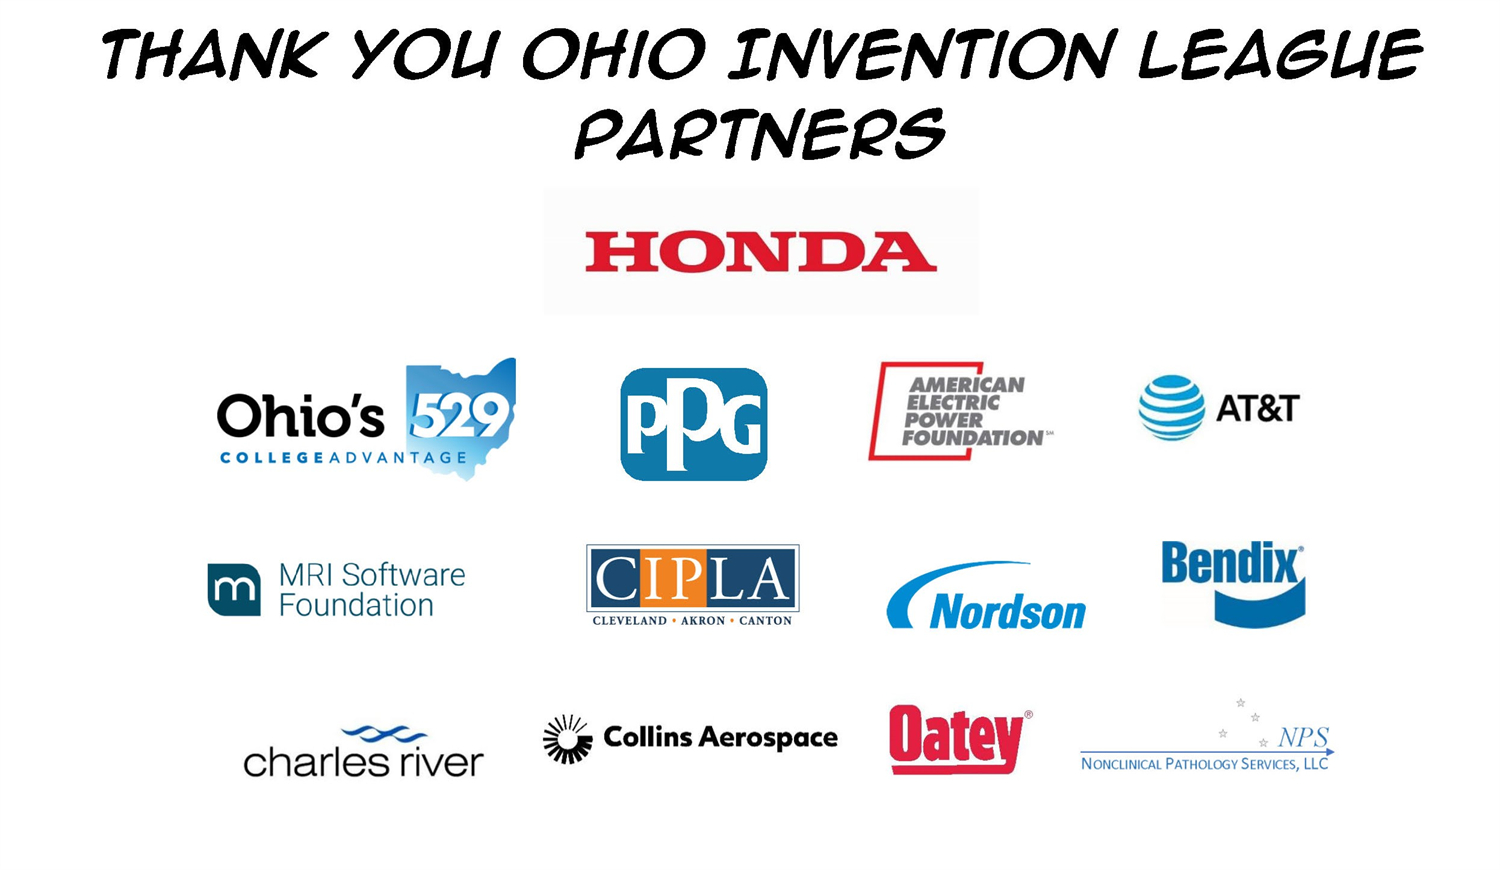 2021-22 State Sponsor Logos together ipdated 3.8.22.png